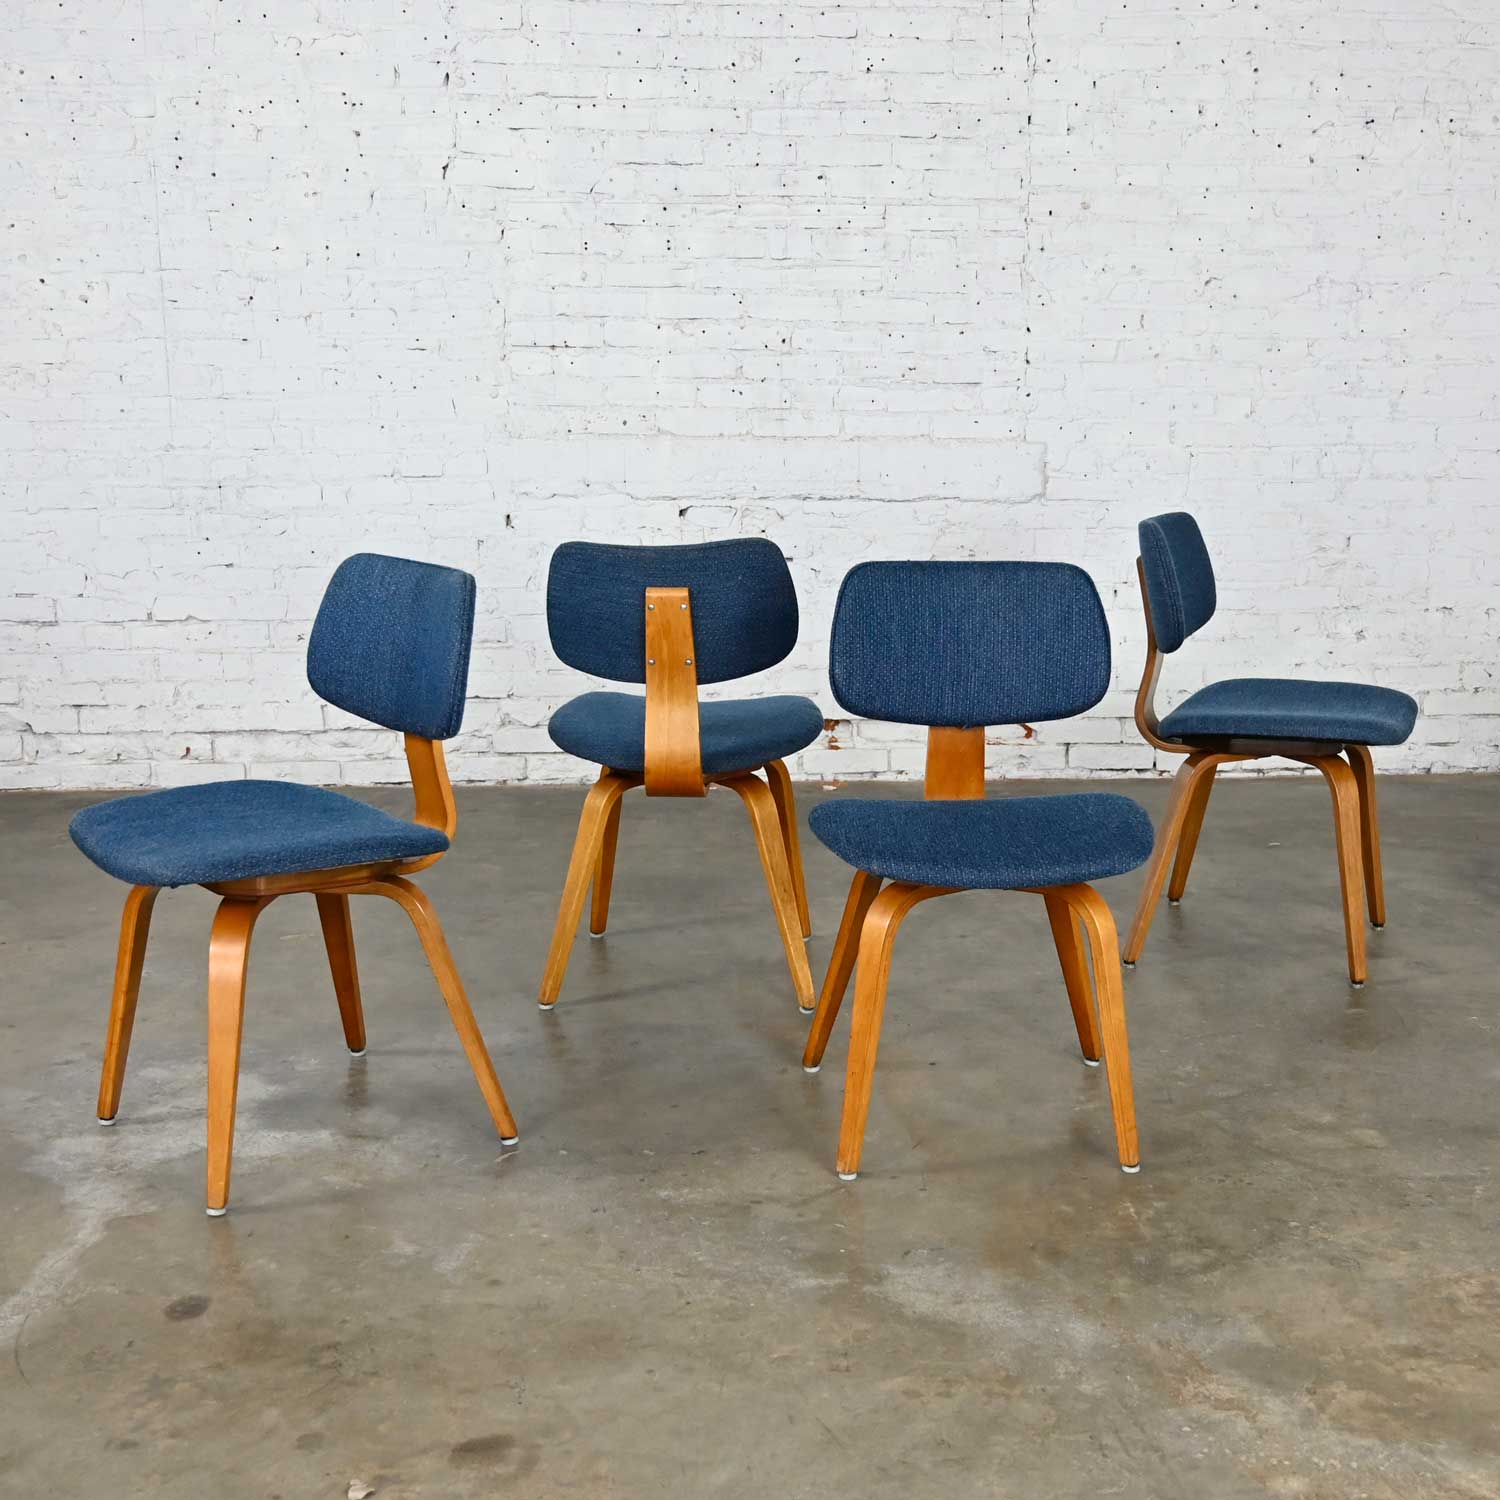 Mid-Century Modern Dining Chairs Blue Fabric and Bent Plywood by Thonet set of 4